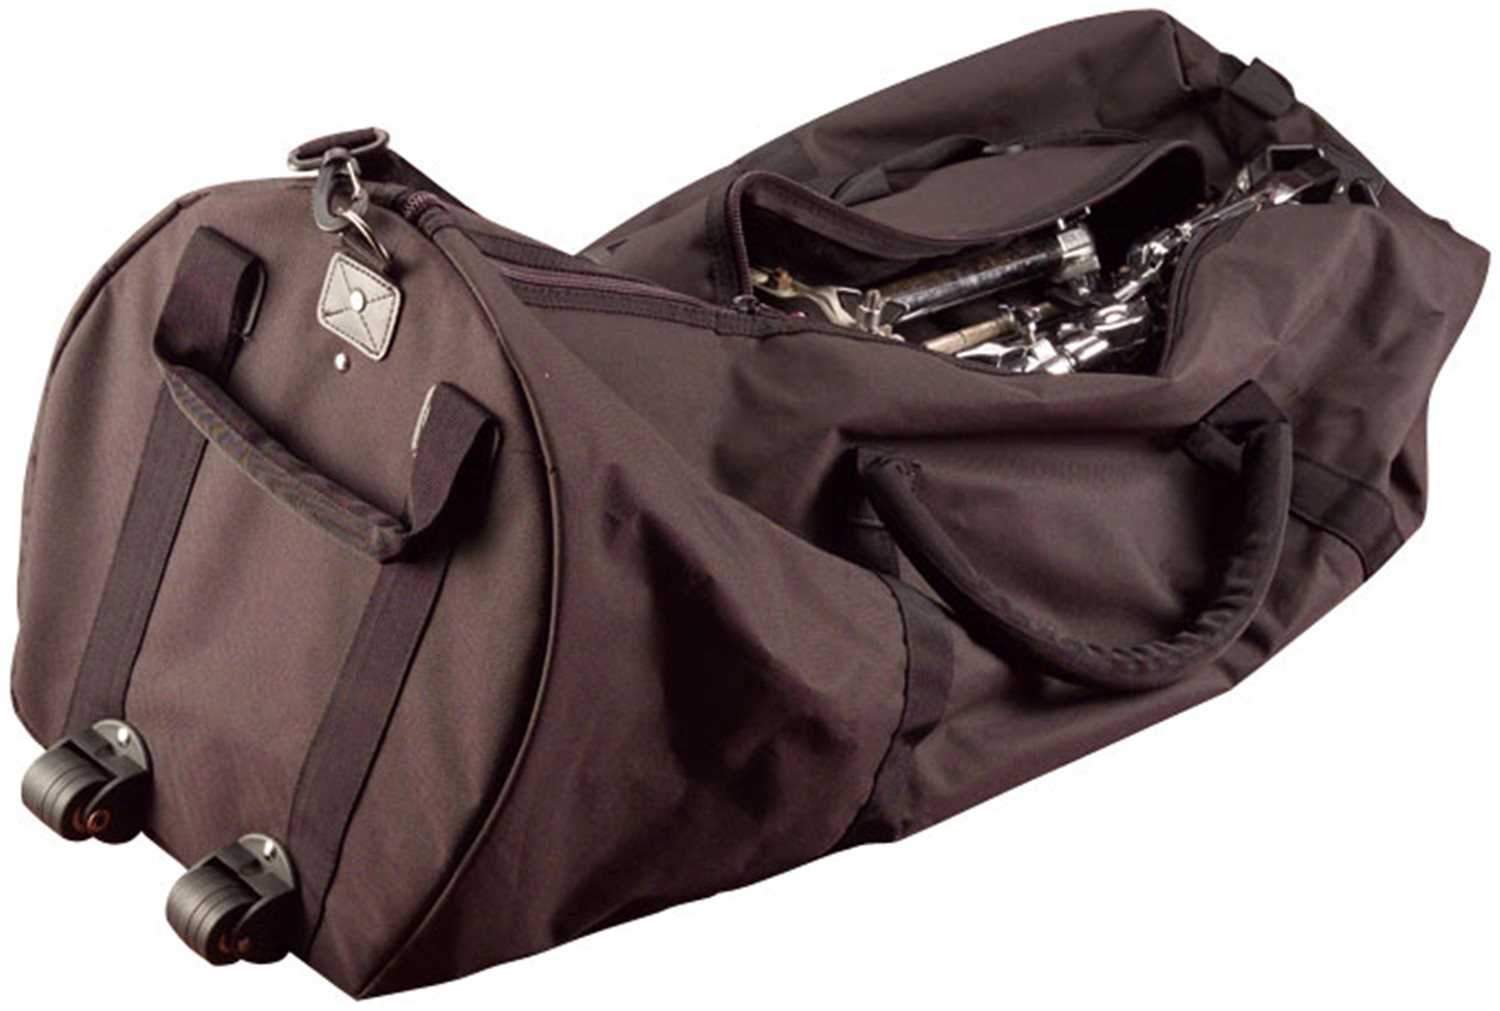 Gator Drum Hardware Bag 14In x 36In with Wheels - ProSound and Stage Lighting